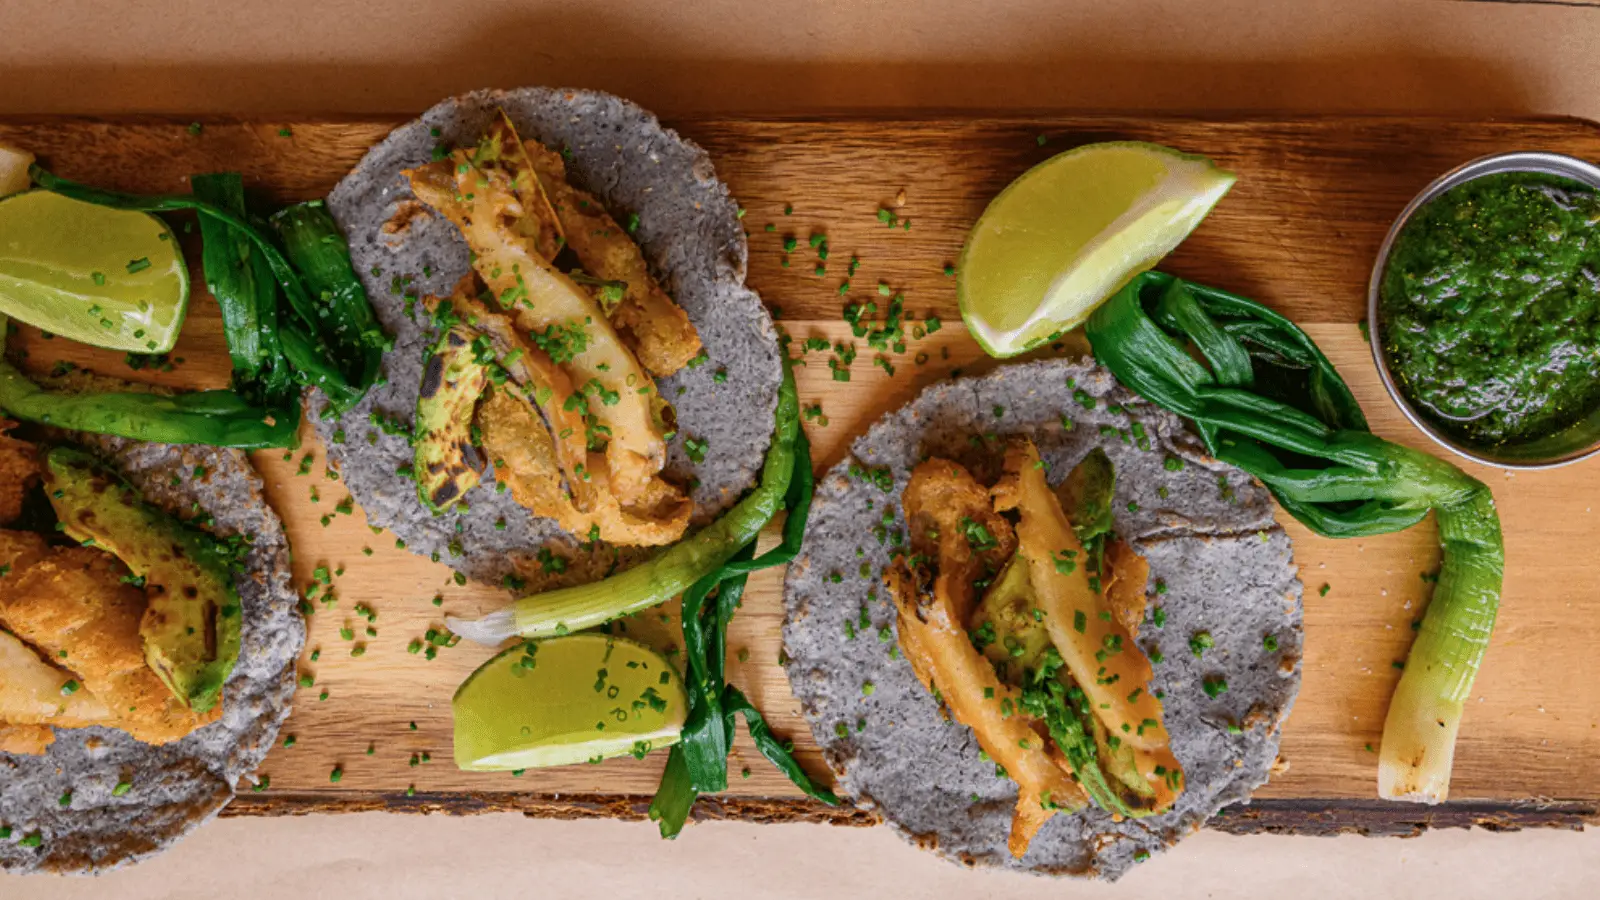 Three blue corn tacos topped with golden-brown fish, garnished with chopped chives, make for the best lunch on the Monterey Peninsula. Each taco is accompanied by lime wedges, green onions, and a small cup of green sauce, all artfully arranged on a wooden board.